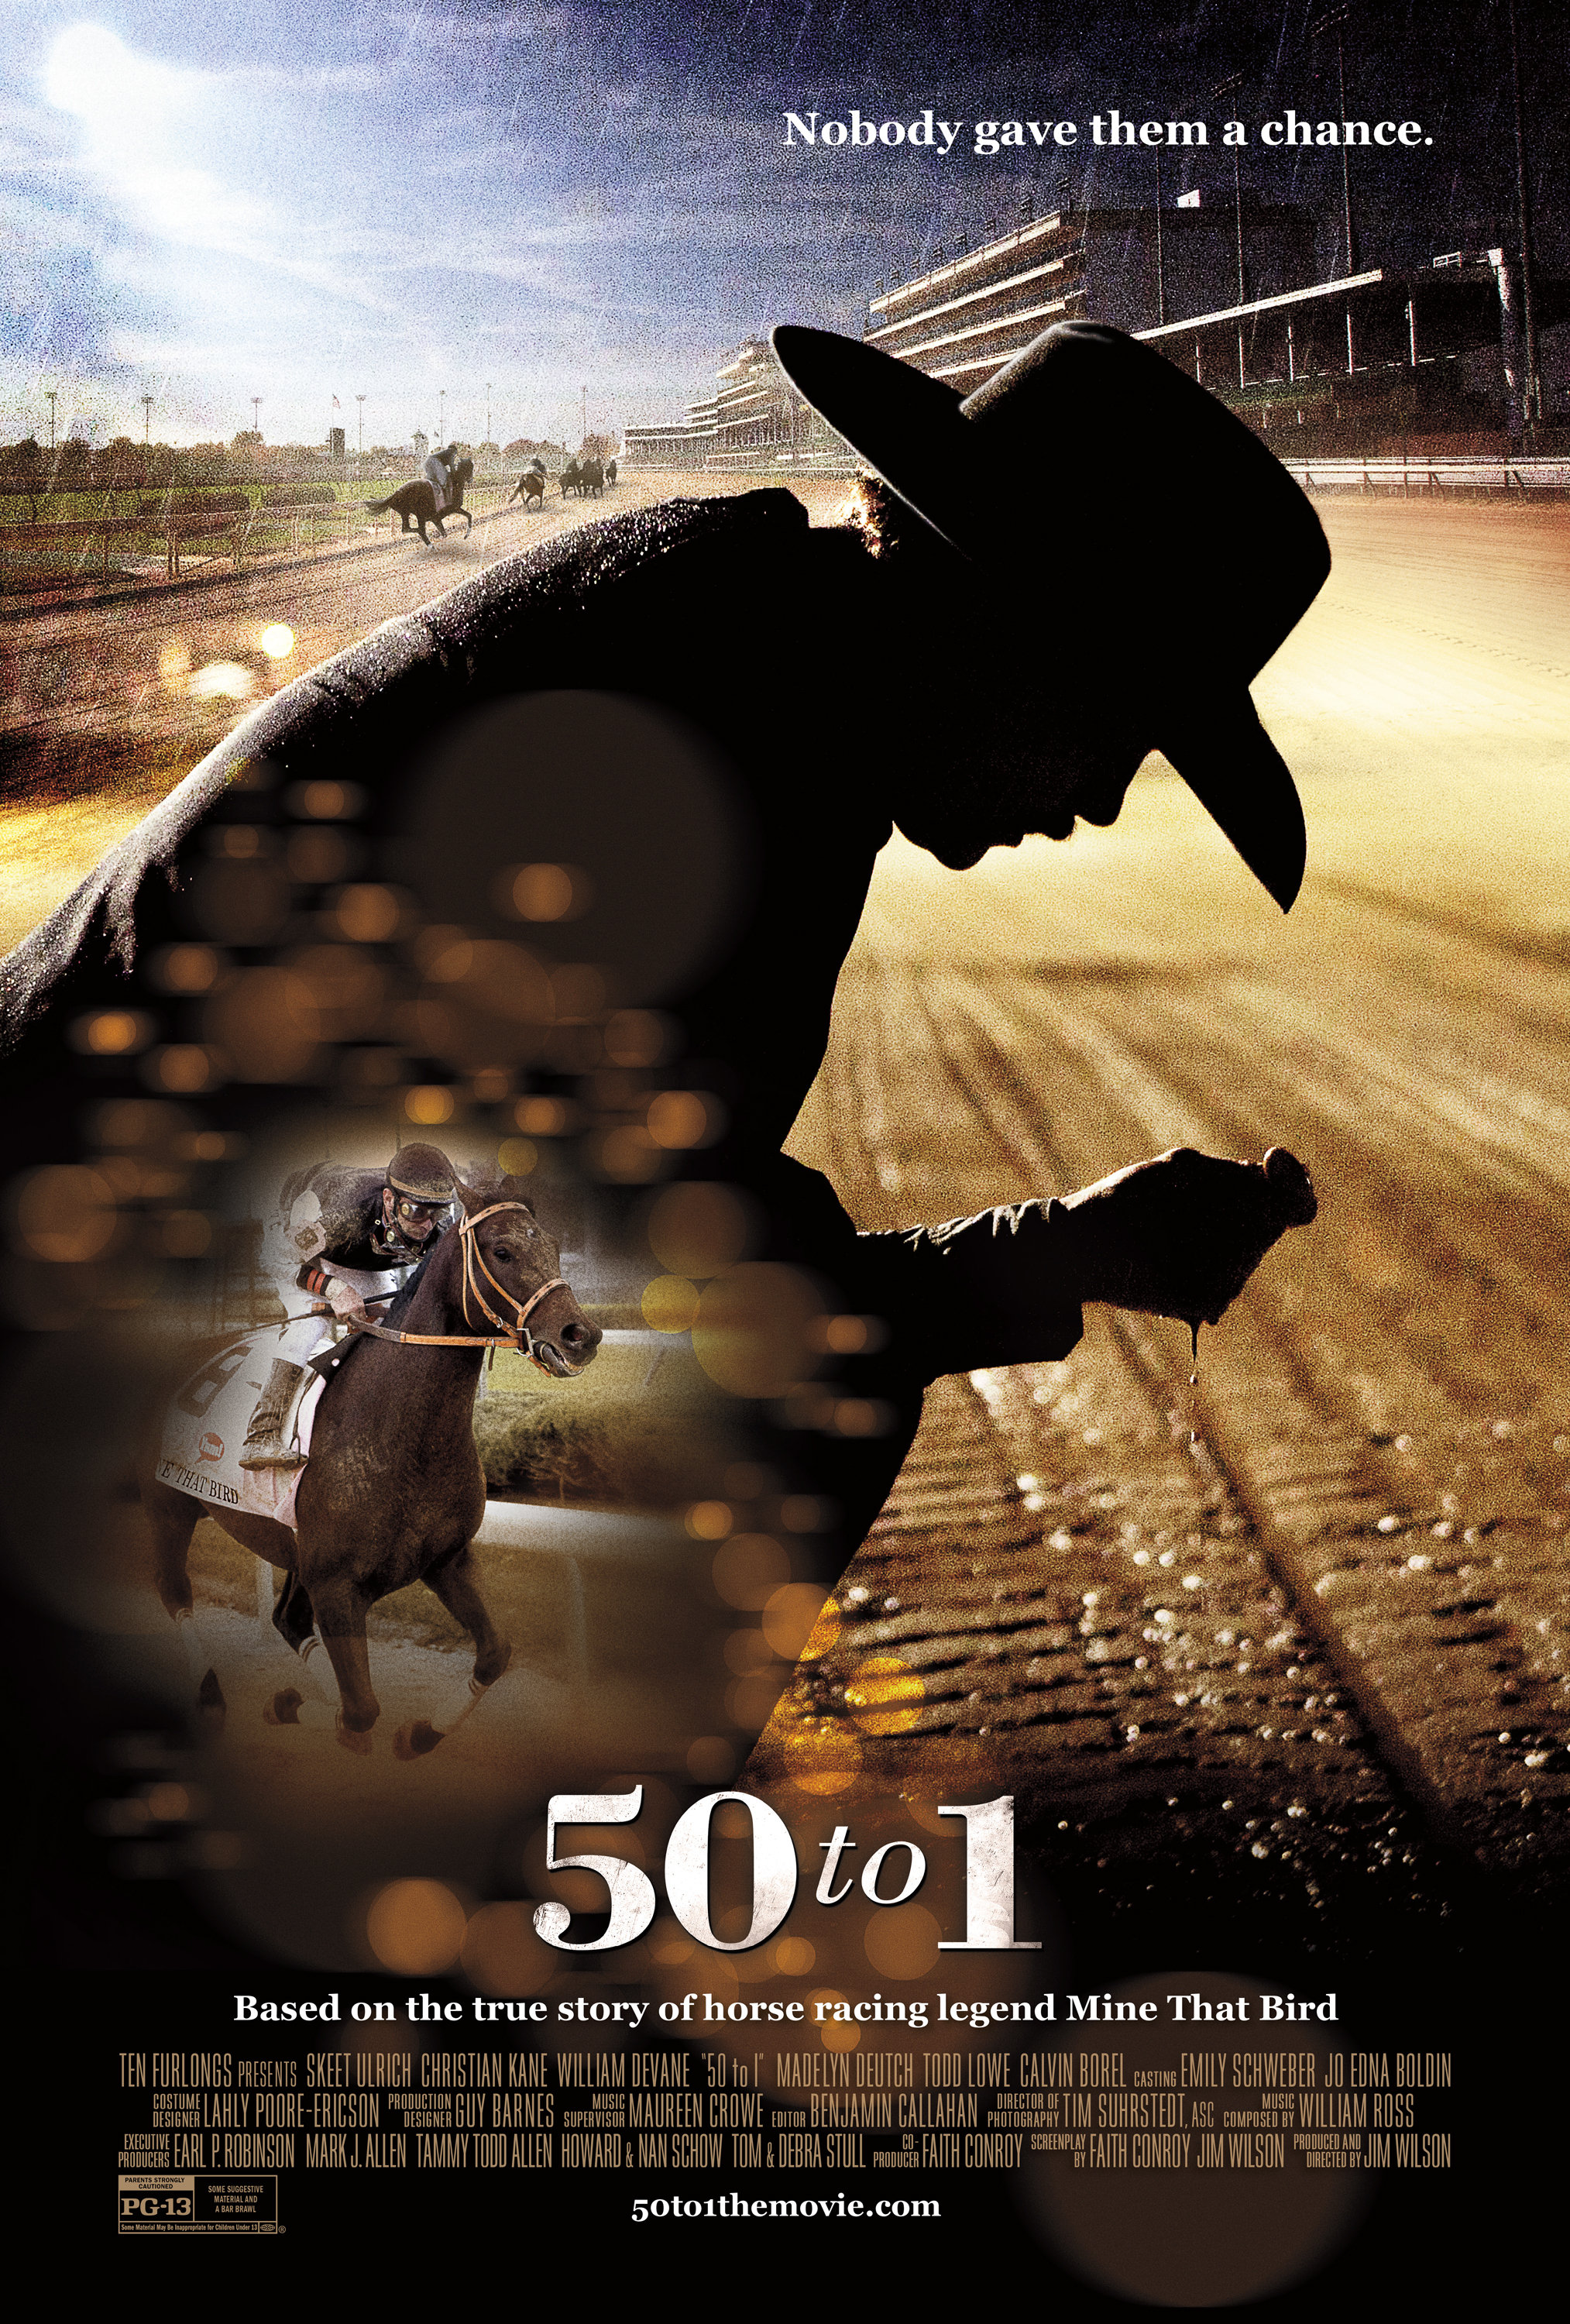 A picture of the movie 50 to 1.